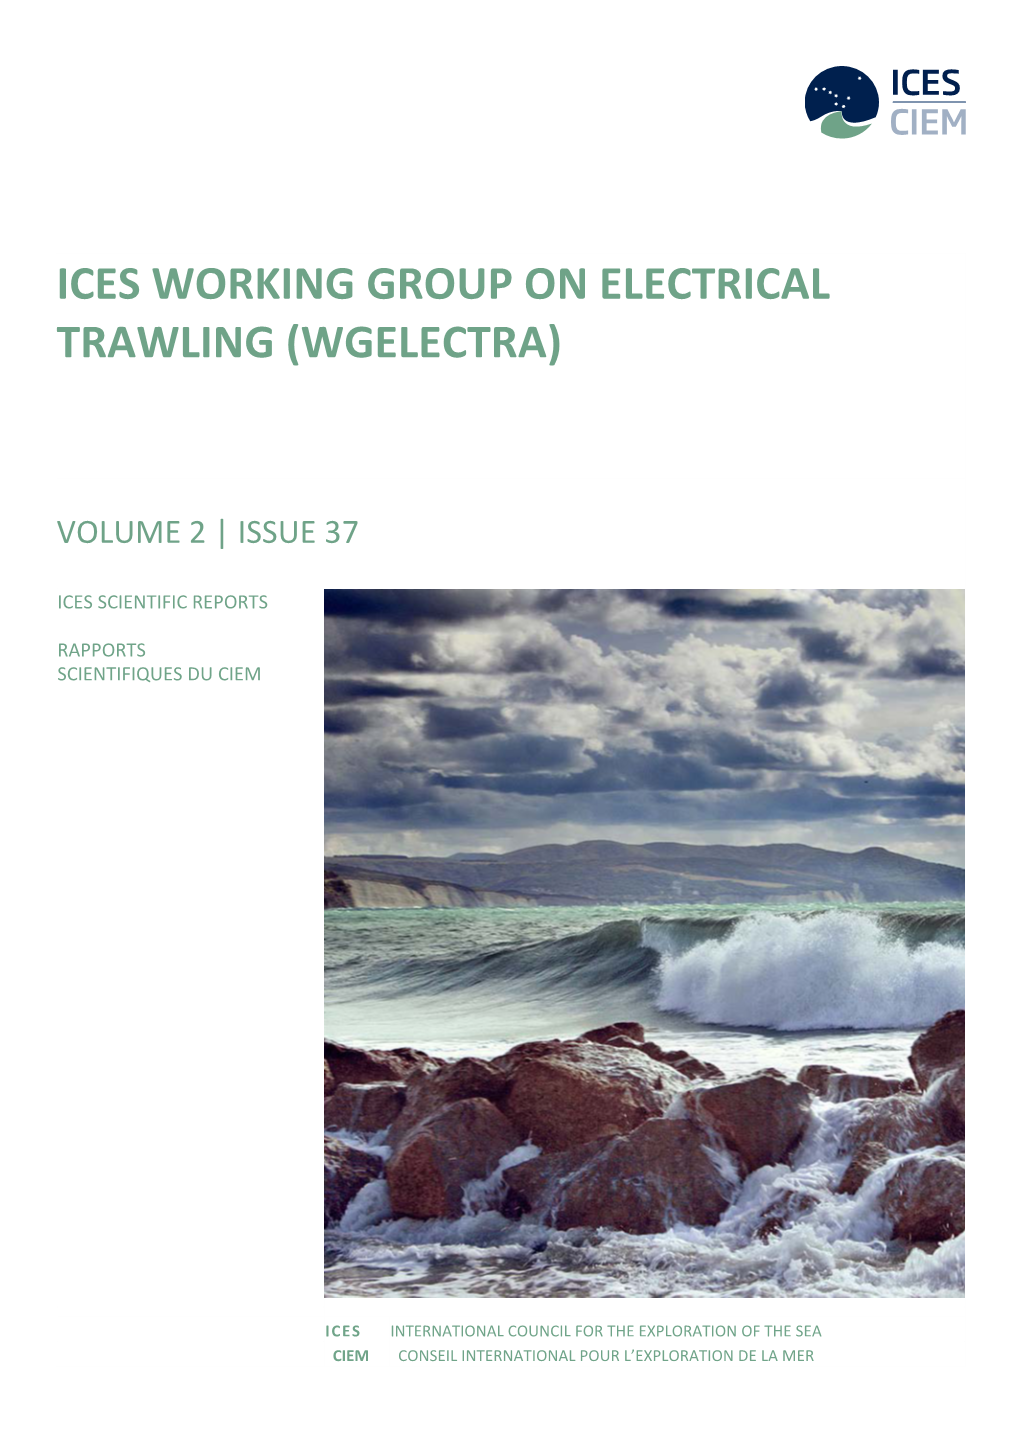 Ices Working Group on Electrical Trawling (Wgelectra)